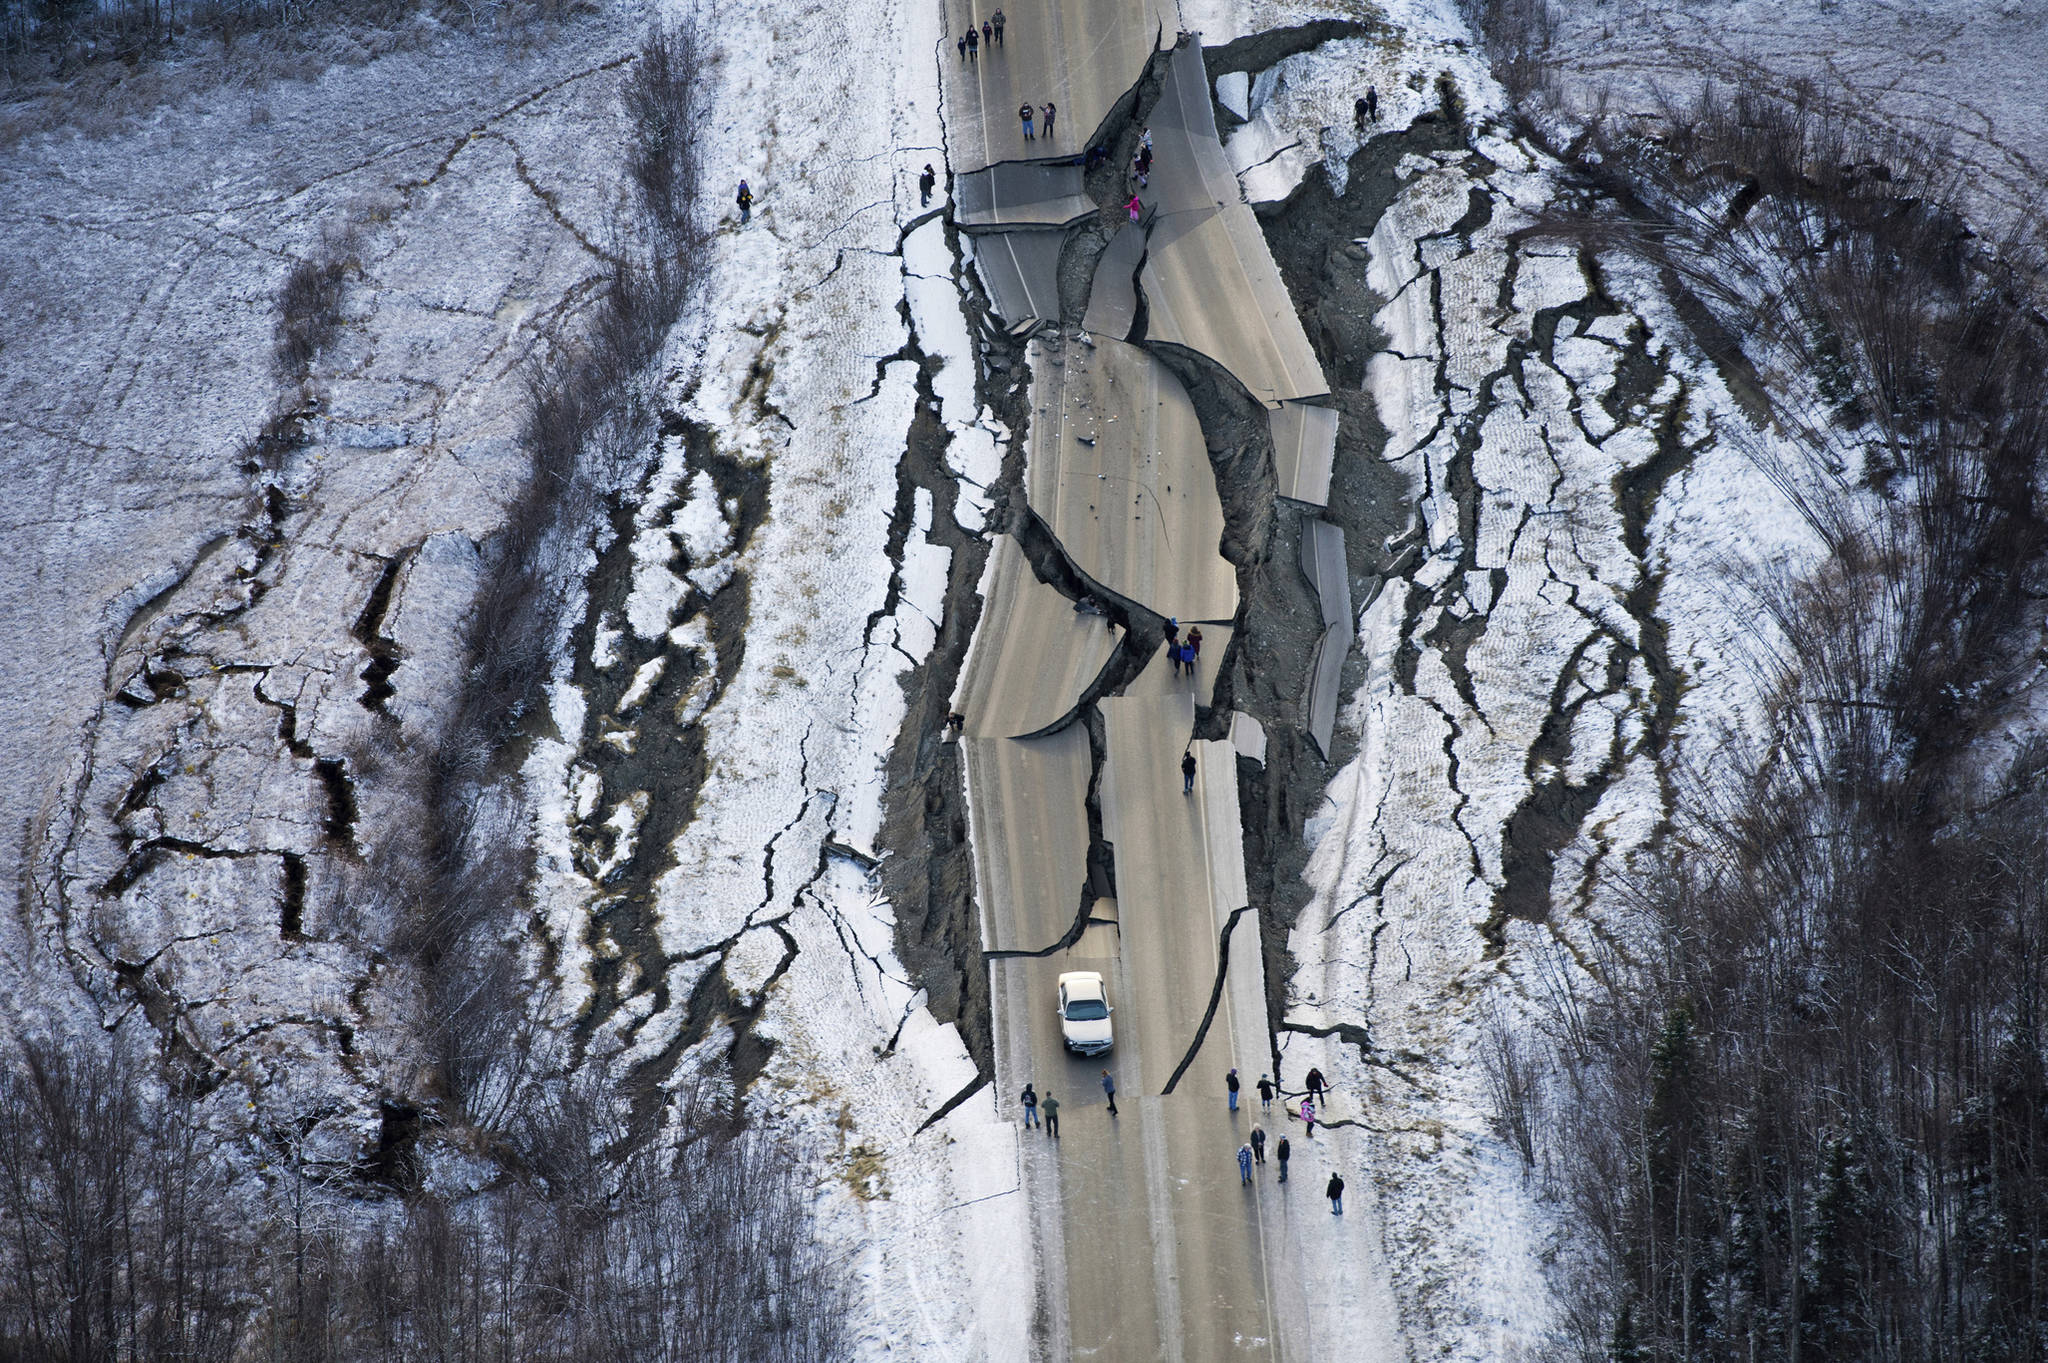 This aerial photo shows damage on Vine Road, south of Wasilla, Alaska, after earthquakes Friday, Nov. 30, 2018. Back-to-back earthquakes measuring 7.0 and 5.7 shattered highways and rocked buildings Friday in Anchorage and the surrounding area, sending people running into the streets and briefly triggering a tsunami warning for islands and coastal areas south of the city. (Marc Lester/Anchorage Daily News via AP)                                This aerial photo shows damage on Vine Road, south of Wasilla, Alaska, after earthquakes Friday, Nov. 30, 2018. Back-to-back earthquakes measuring 7.0 and 5.7 shattered highways and rocked buildings Friday in Anchorage and the surrounding area, sending people running into the streets and briefly triggering a tsunami warning for islands and coastal areas south of the city. (Marc Lester/Anchorage Daily News via AP)